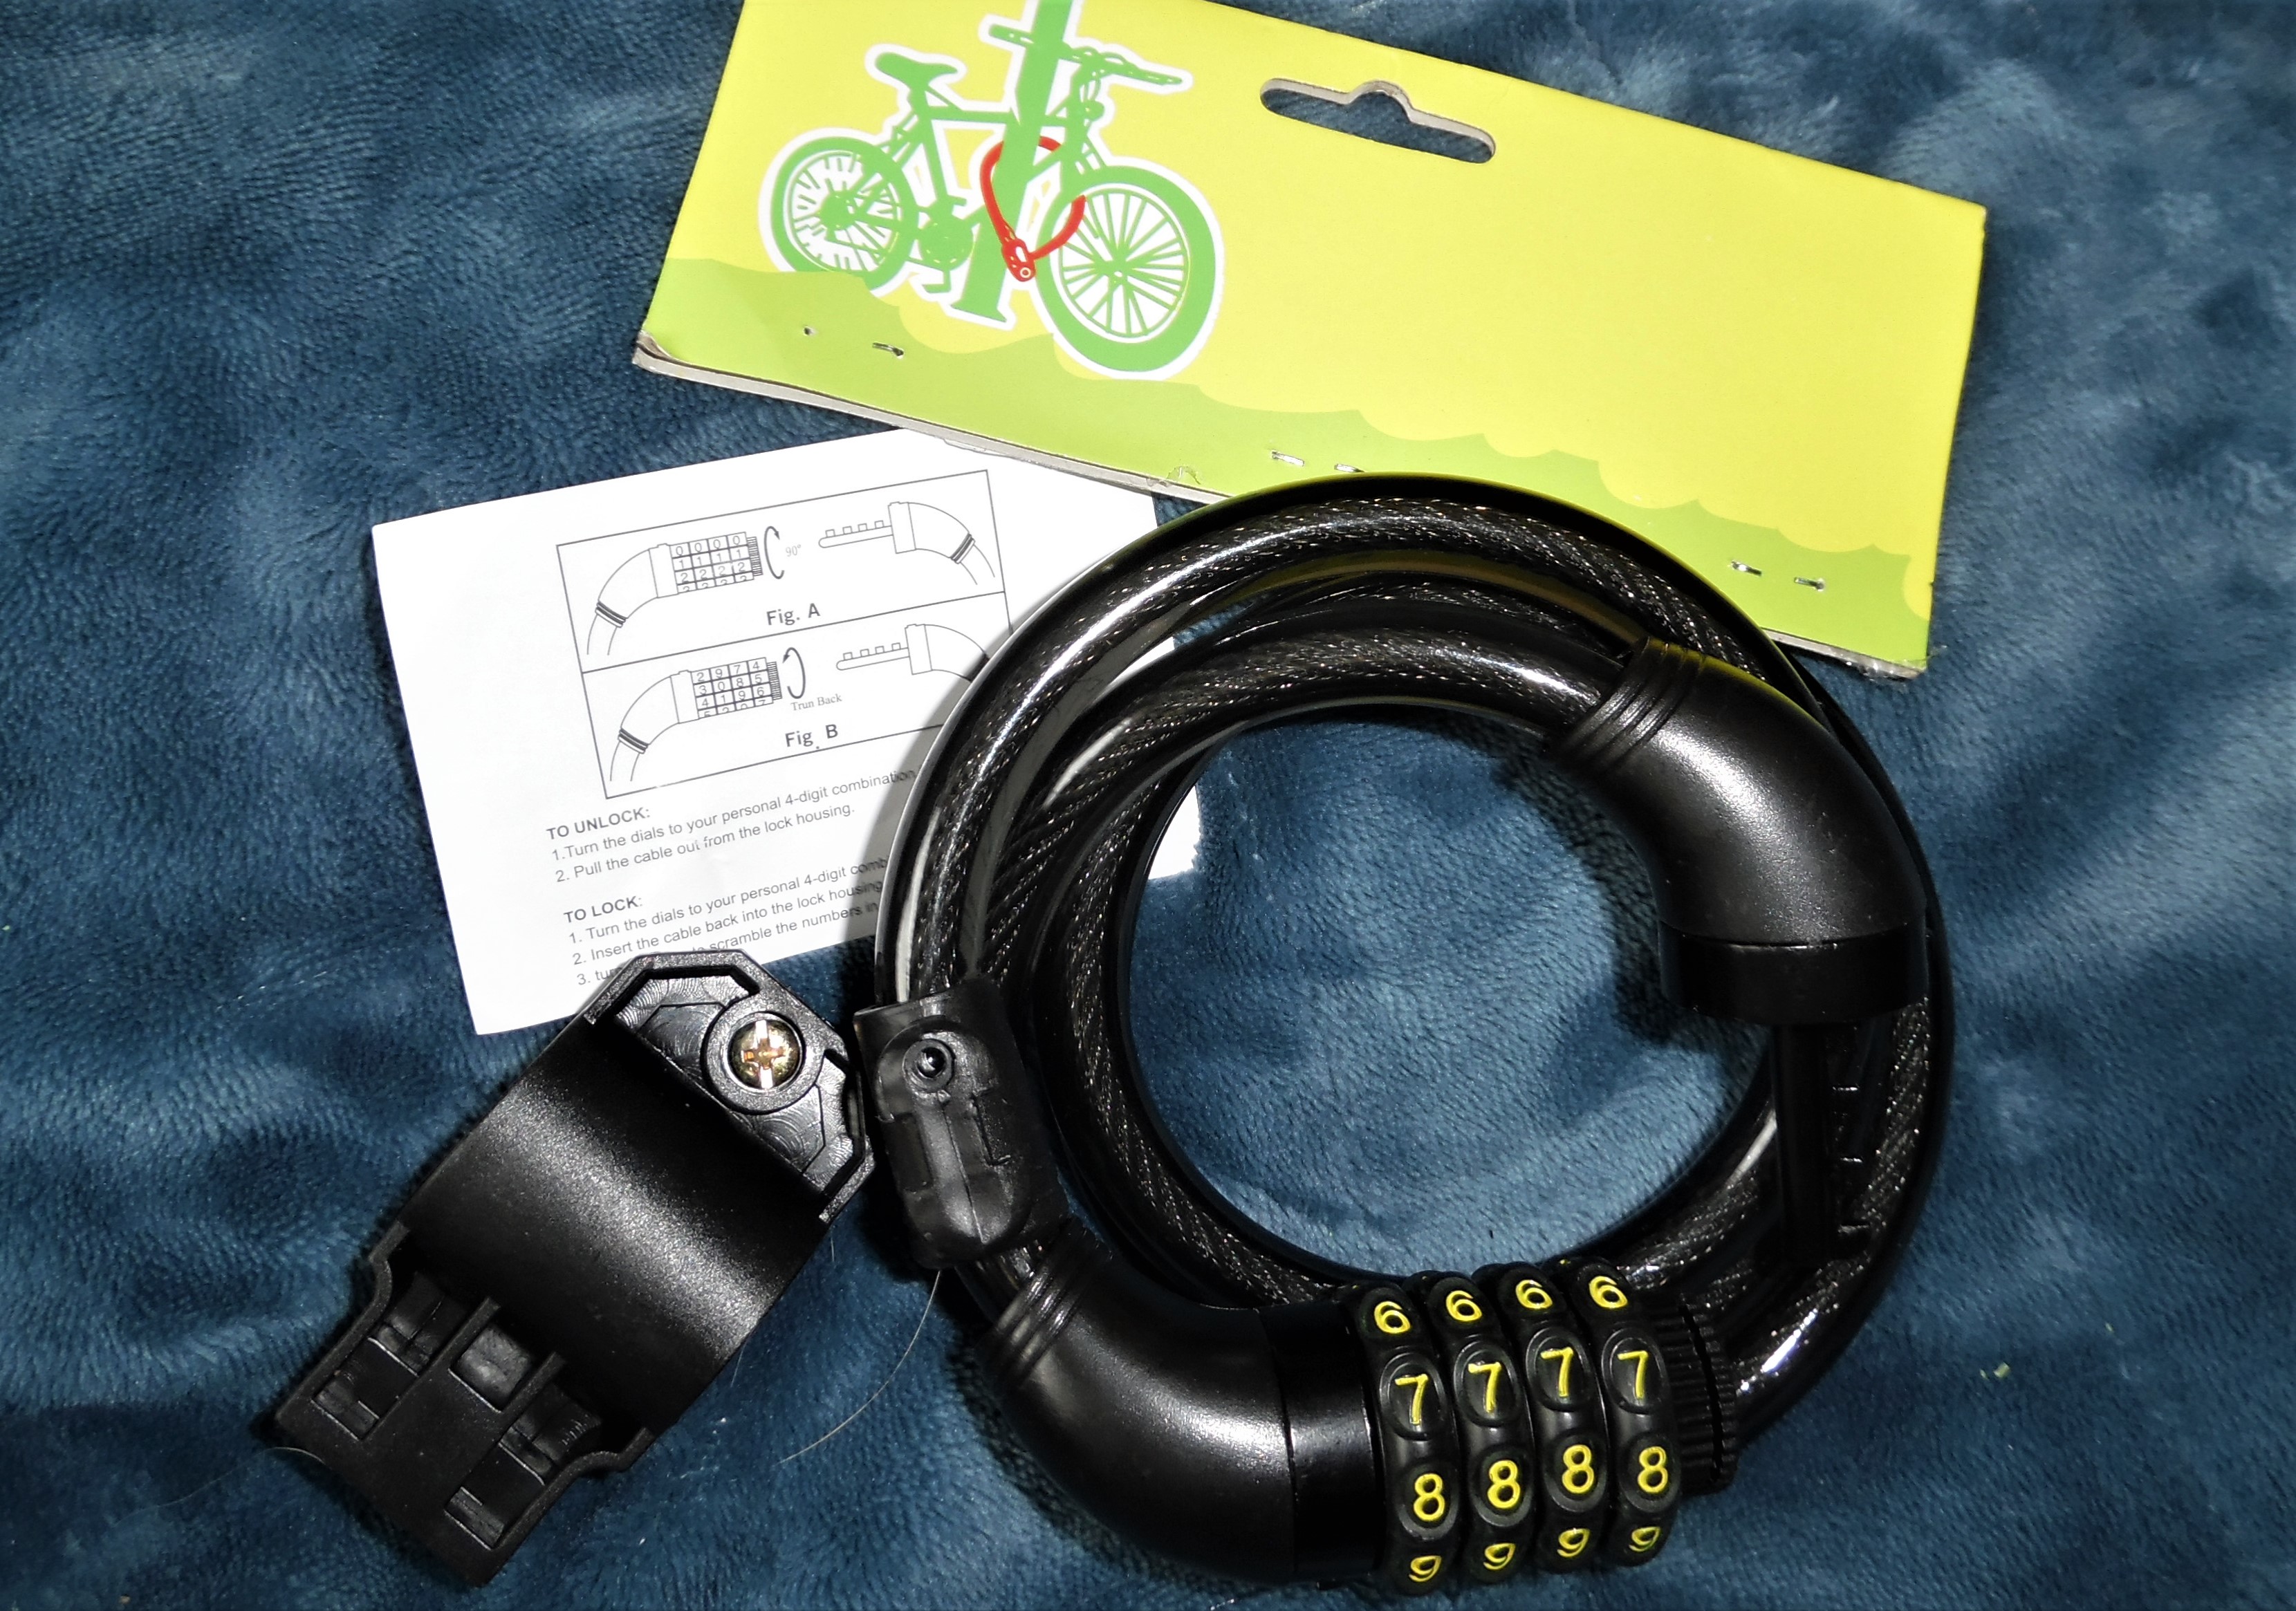 Very Nice!  Heavy Duty Cable with Resettable Lock.